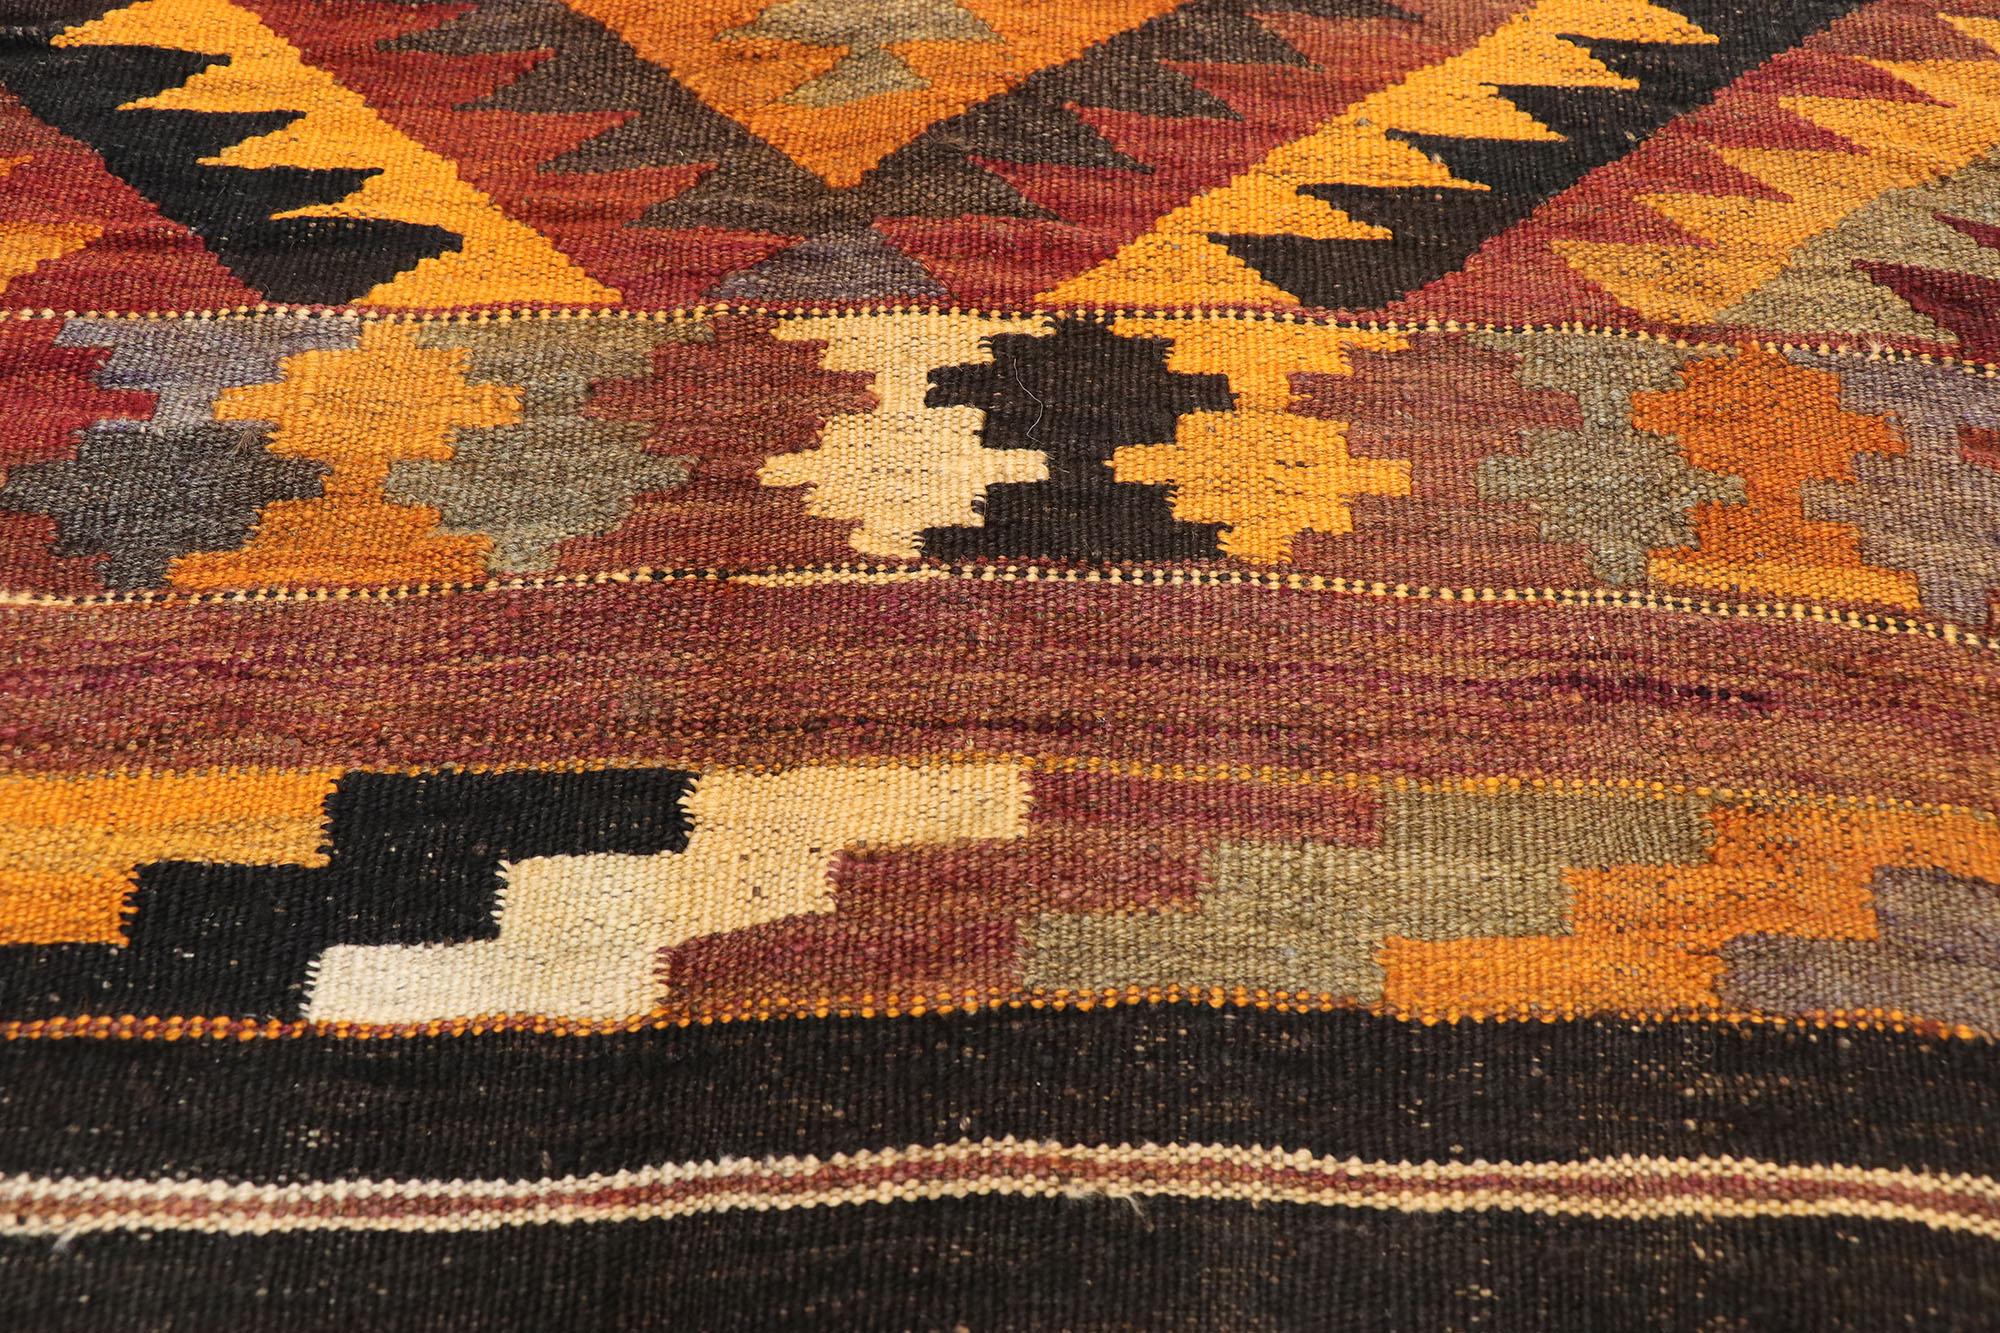 Vintage Afghan Ghalmouri Maimana Kilim Rug with Nomadic Tribal Style In Good Condition For Sale In Dallas, TX